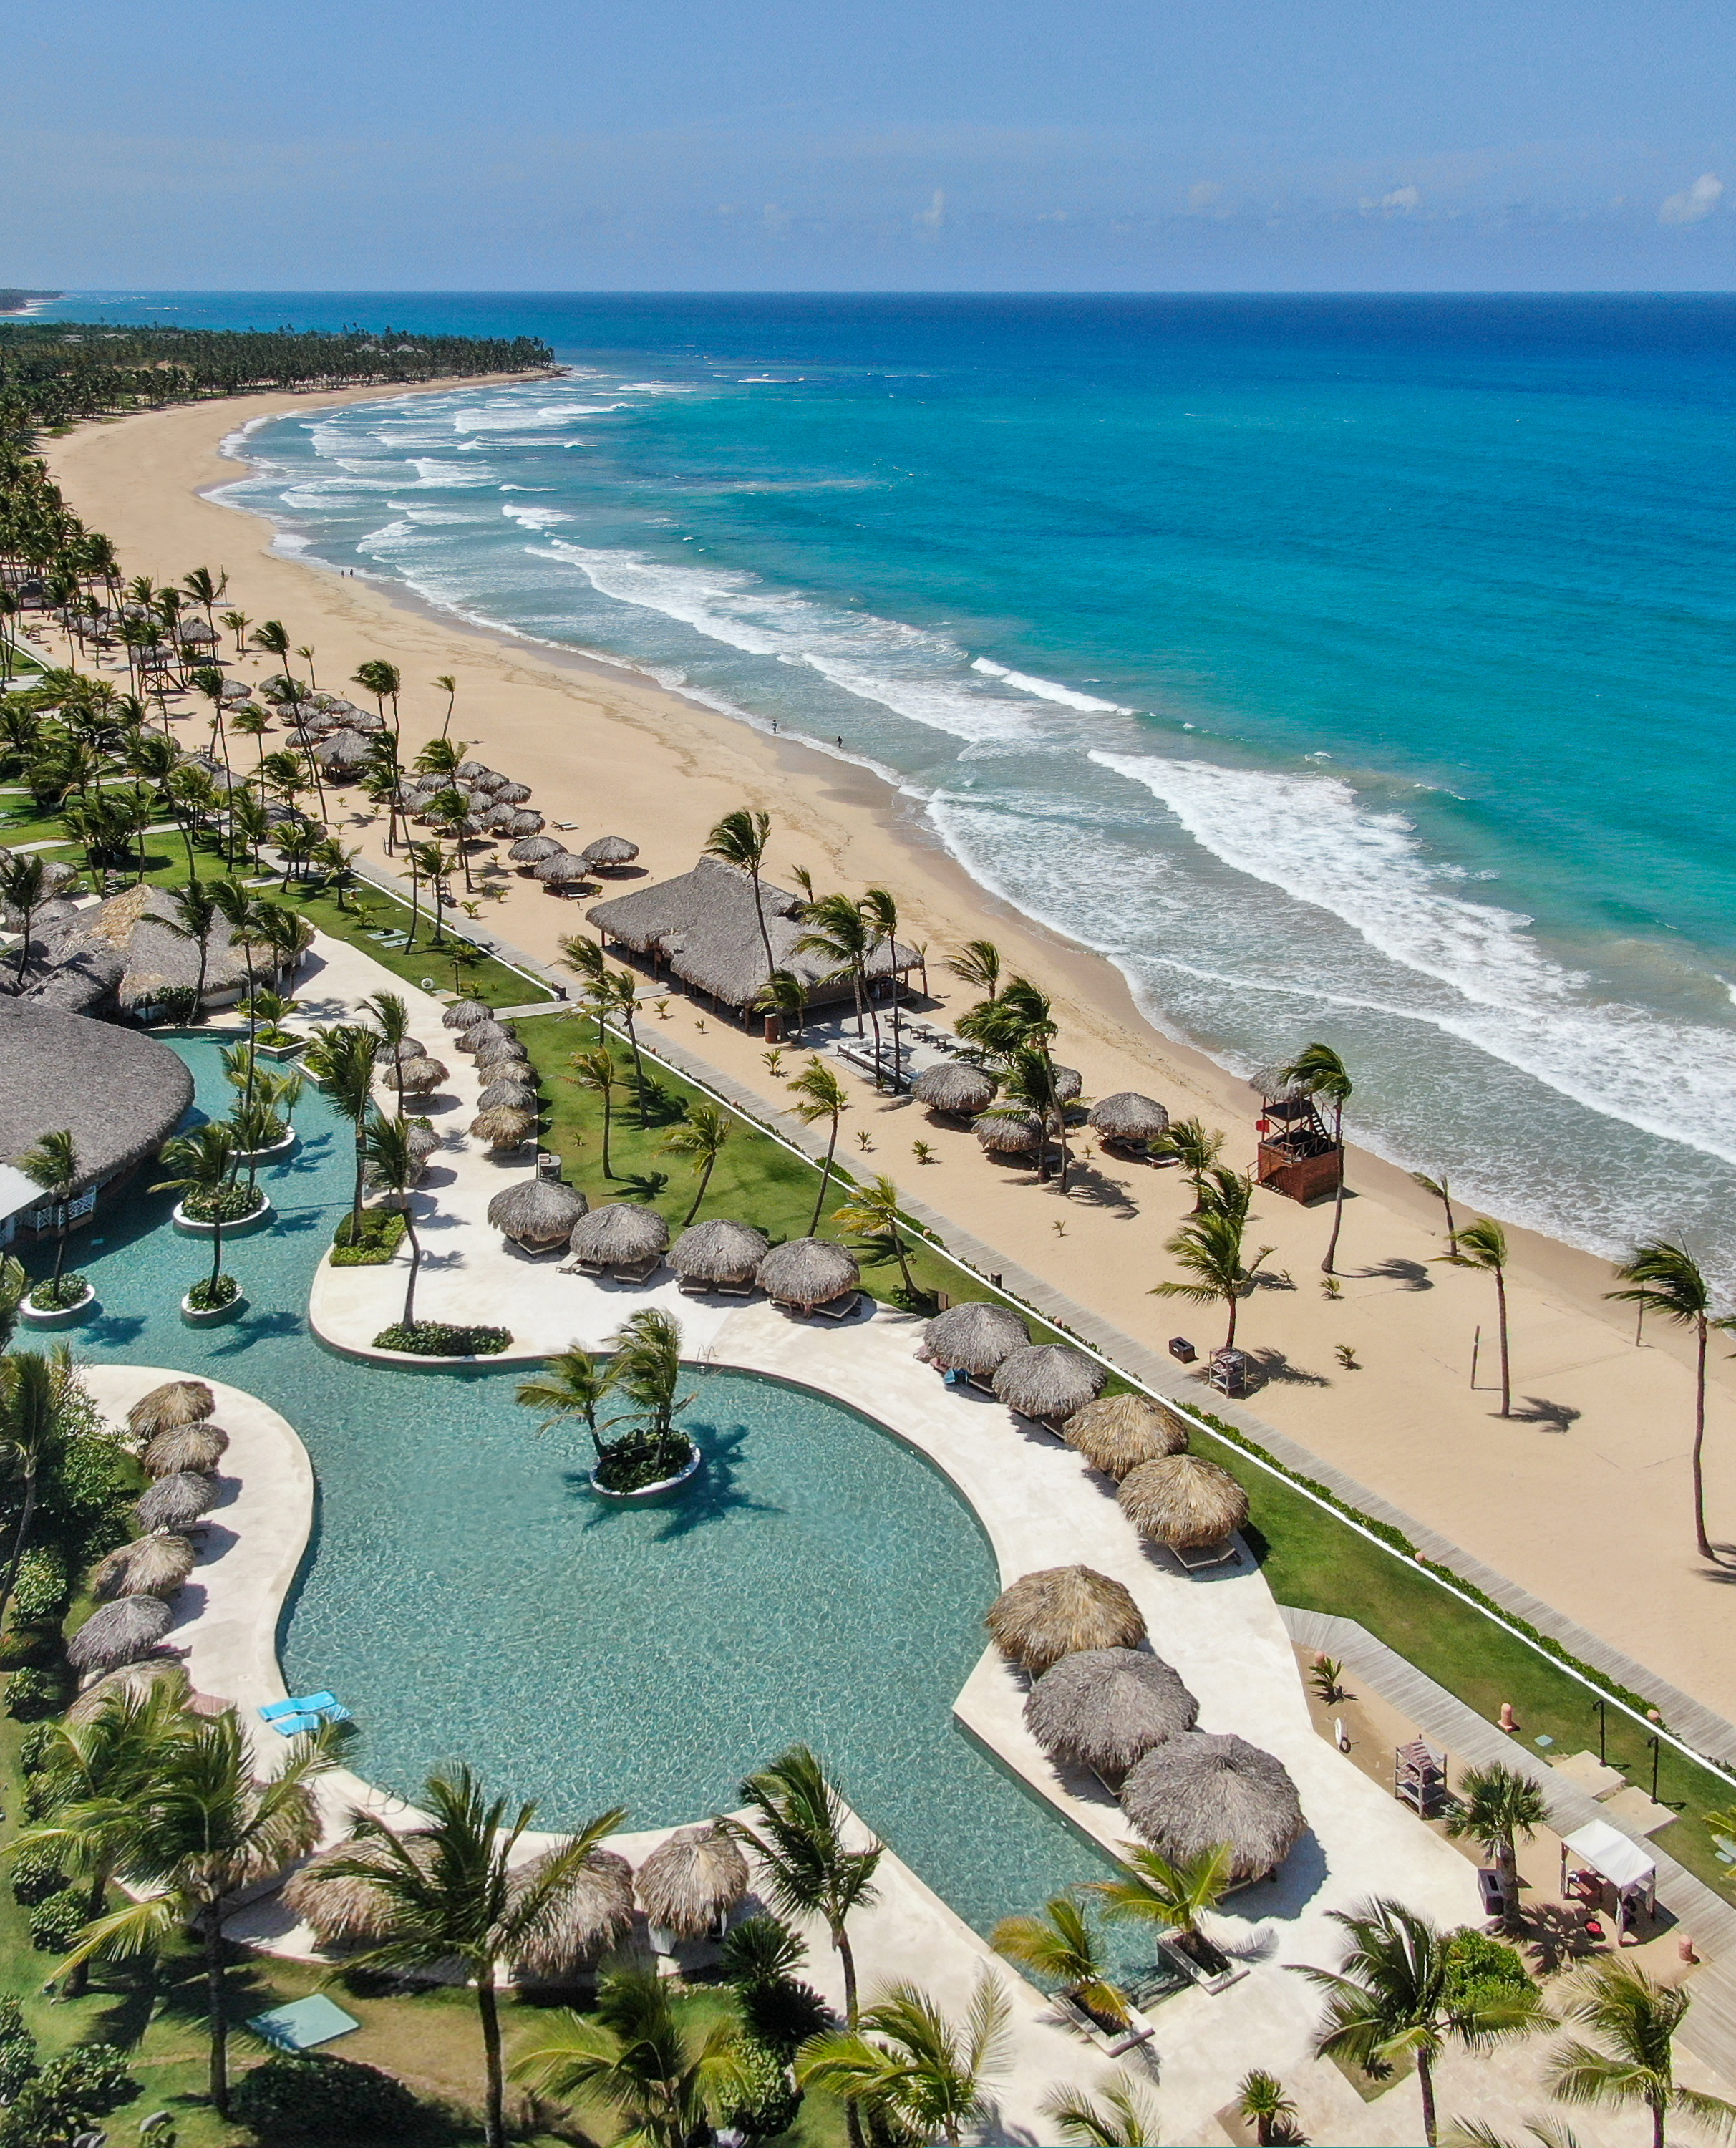 The endless beaches of Excellence Punta Cana